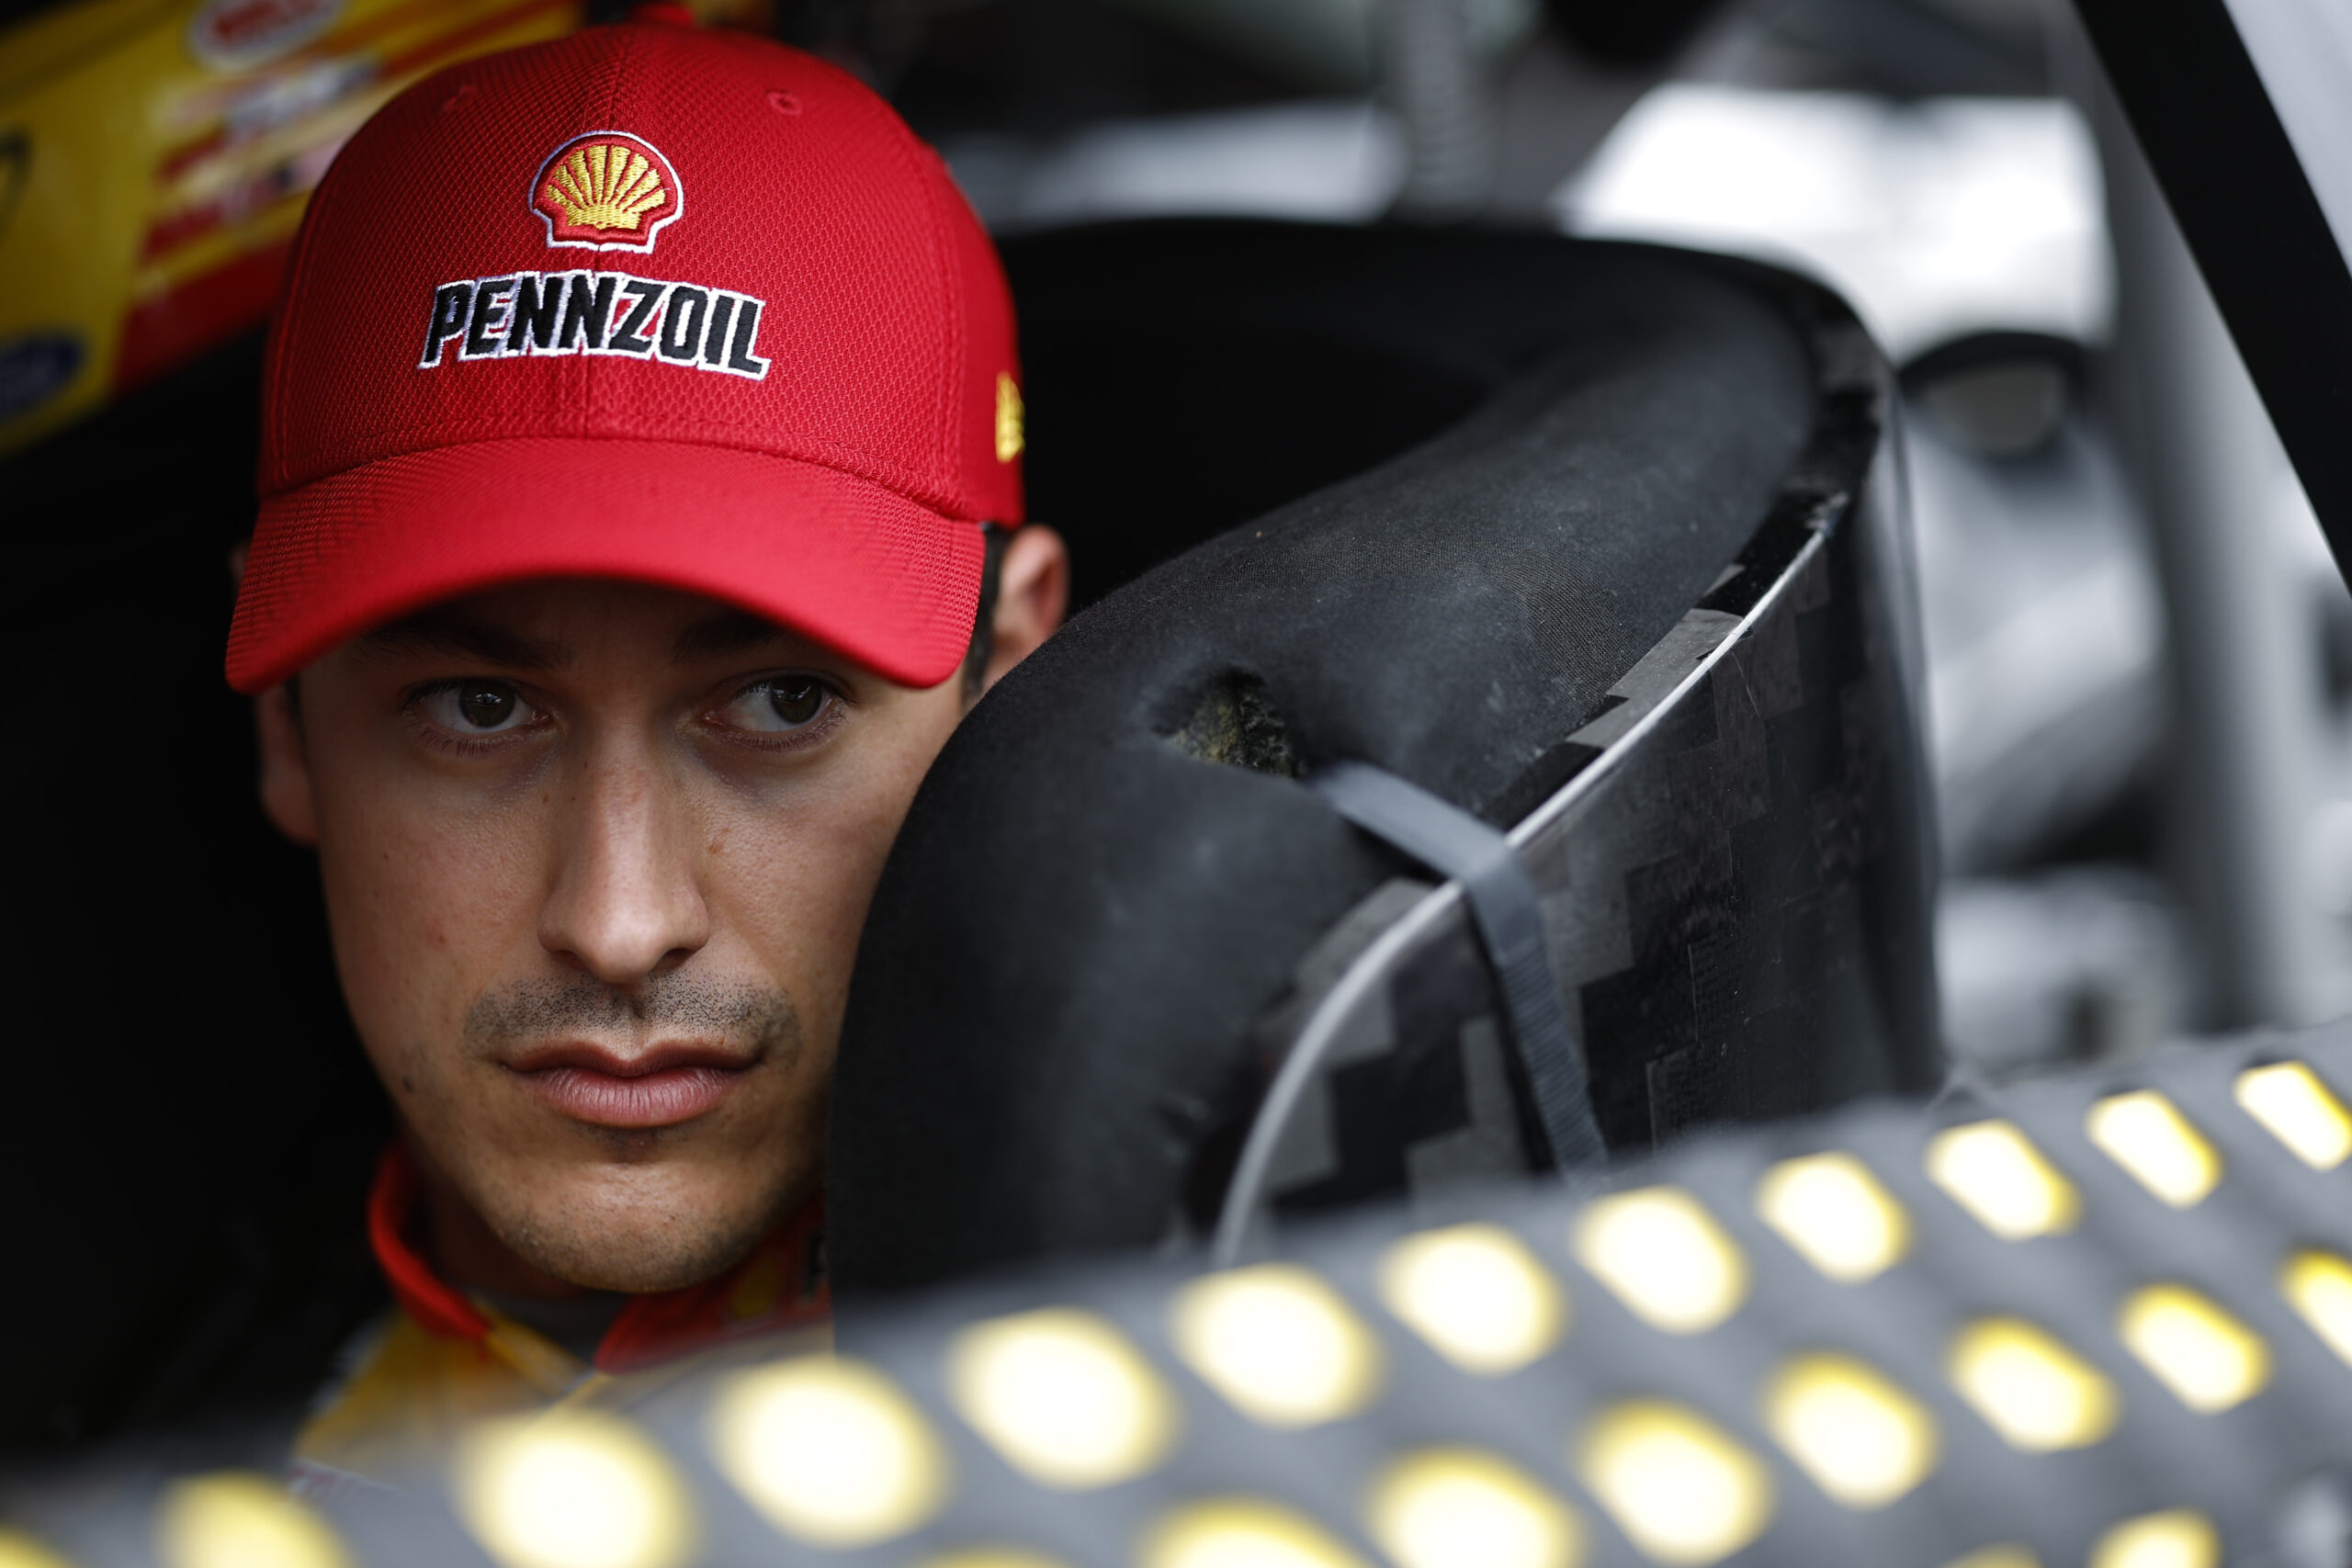 Logano, McDowell Qualify on Daytona 500 Front Row for Ford